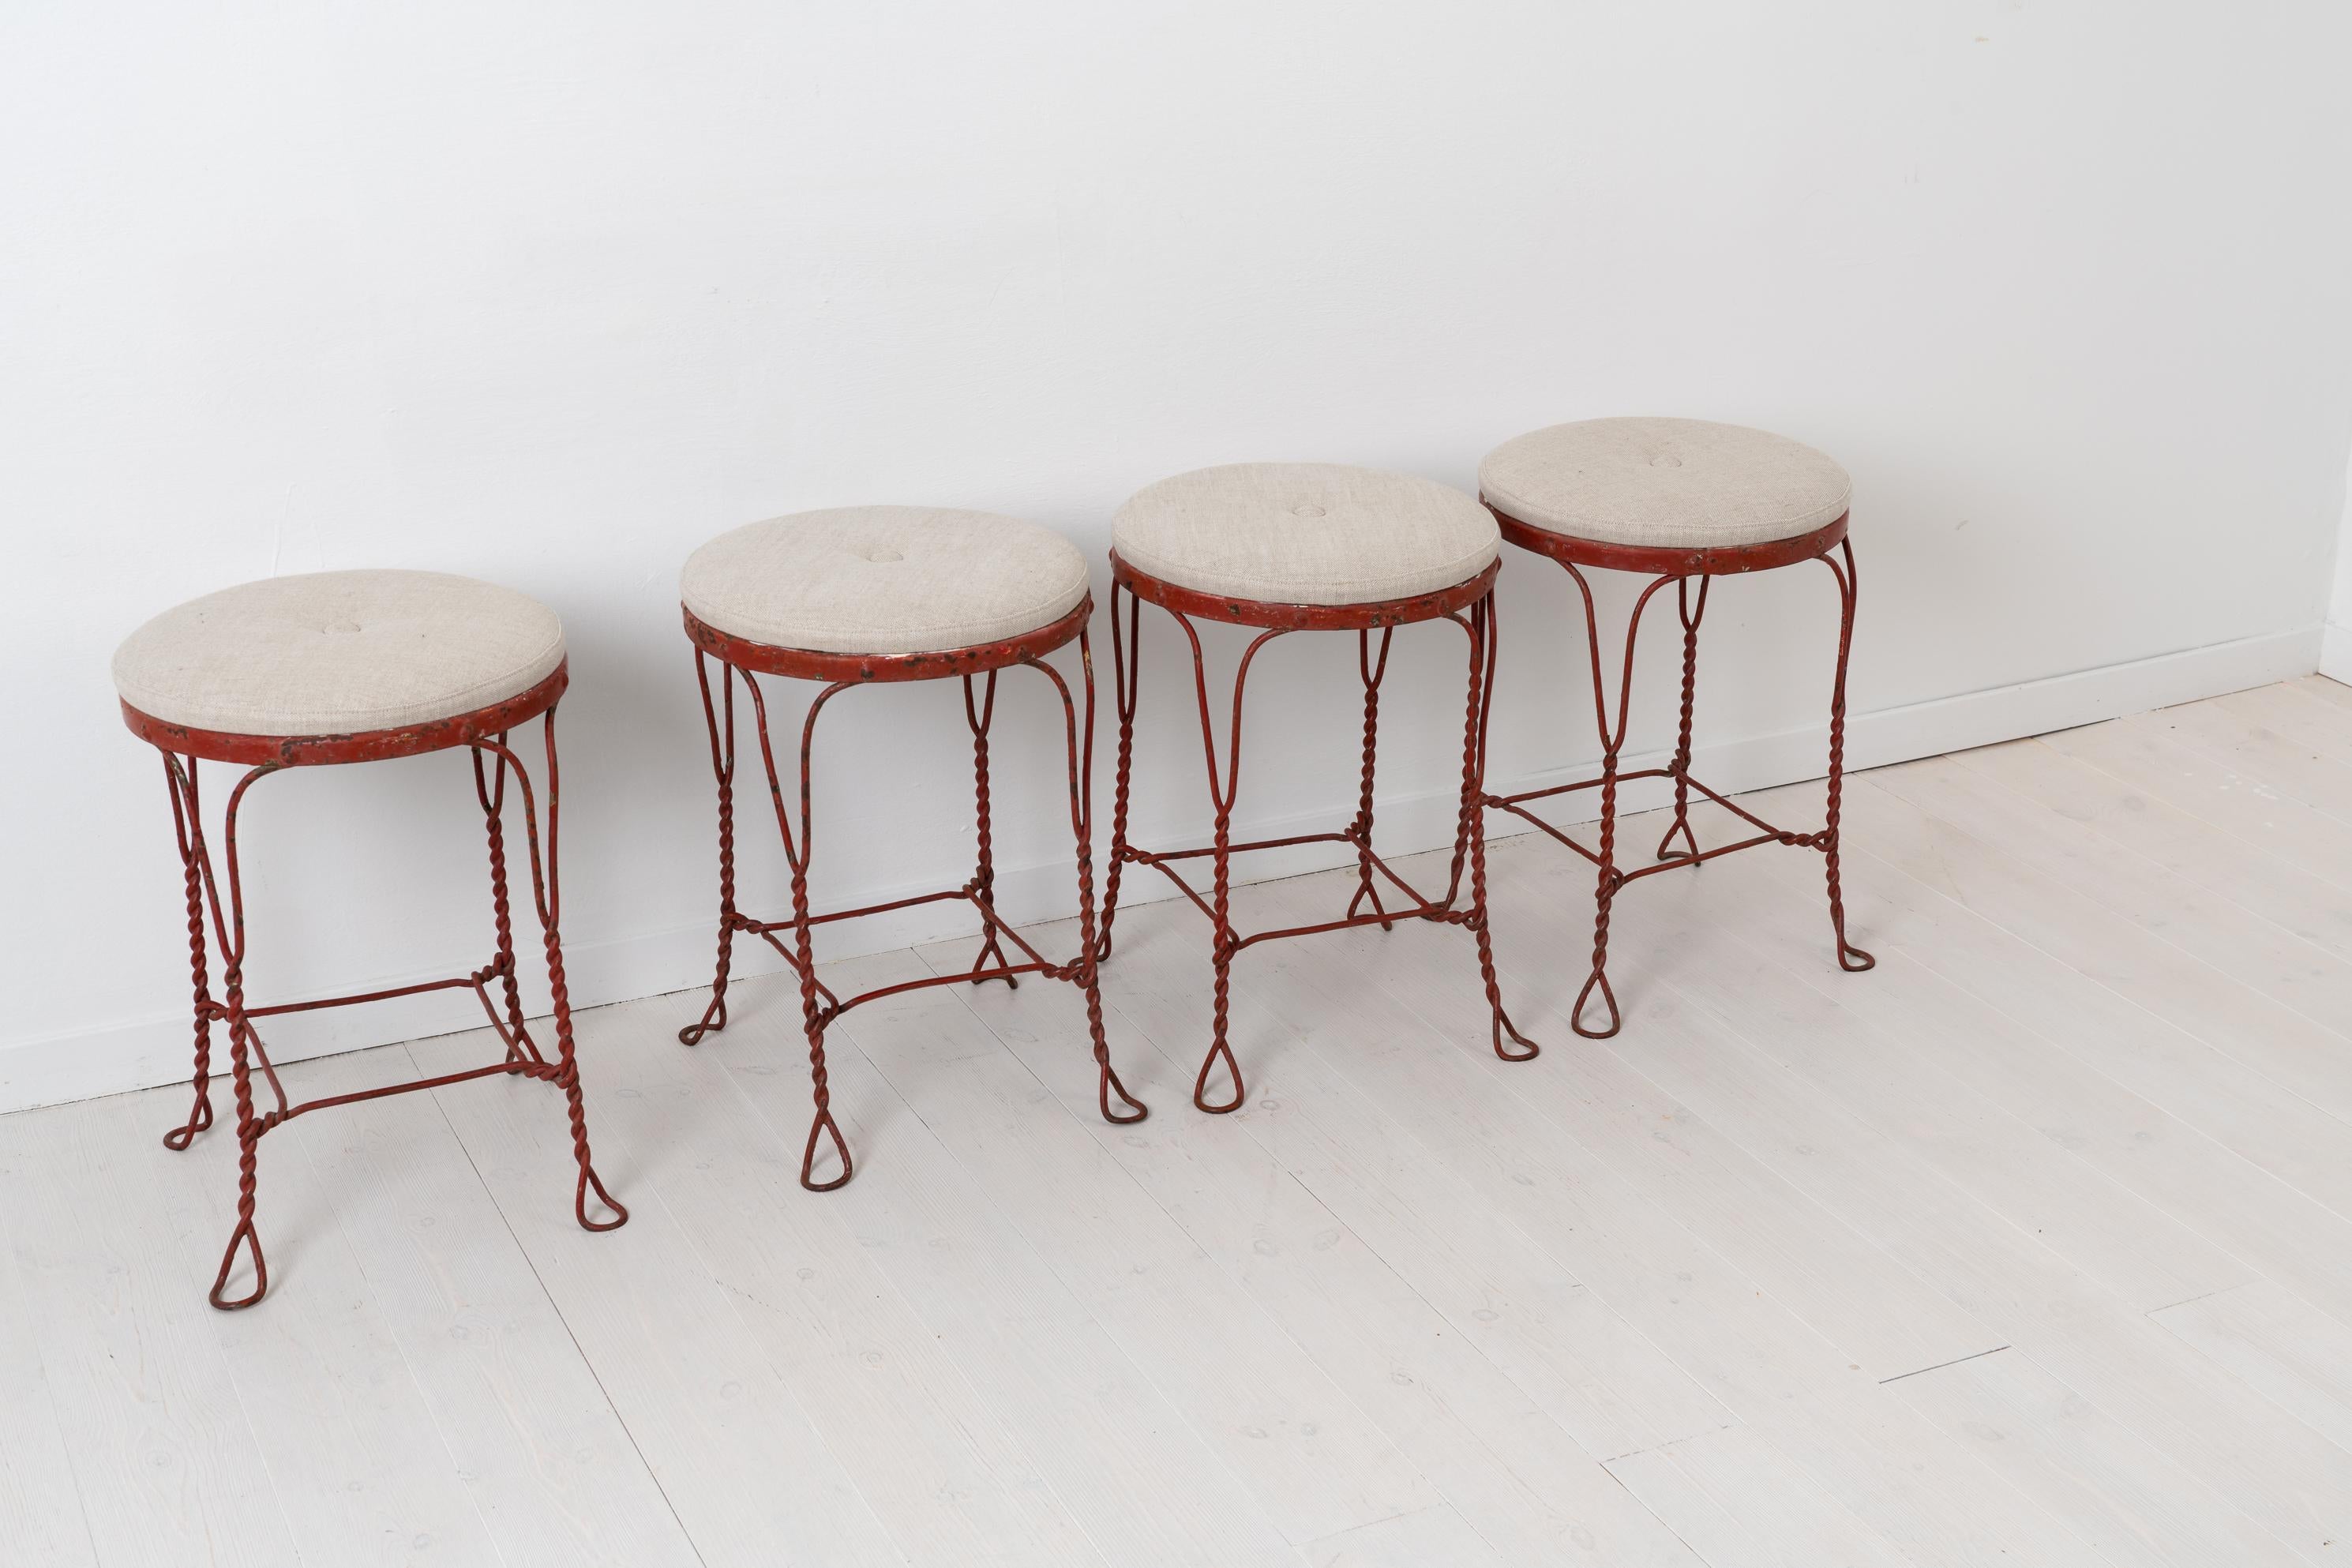 Swedish Mid-Century Modern Red Iron Stools In Good Condition For Sale In Kramfors, SE